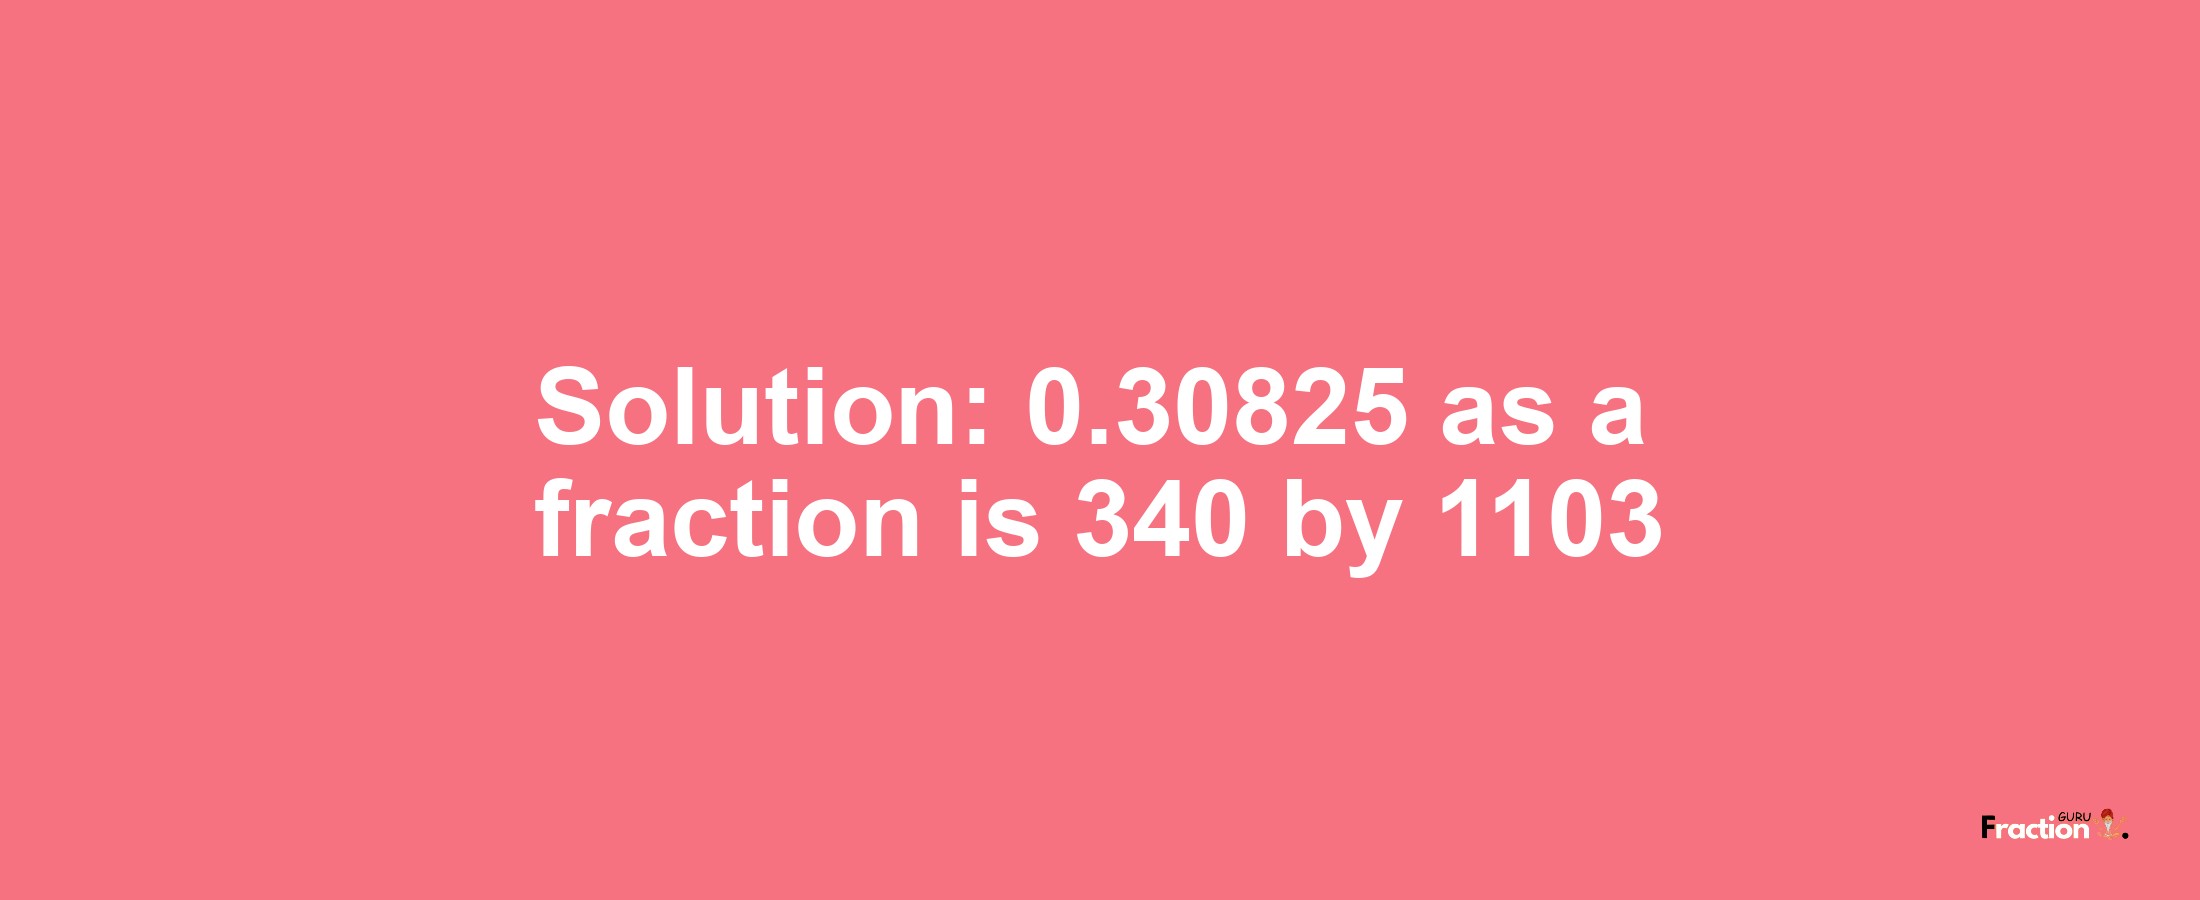 Solution:0.30825 as a fraction is 340/1103